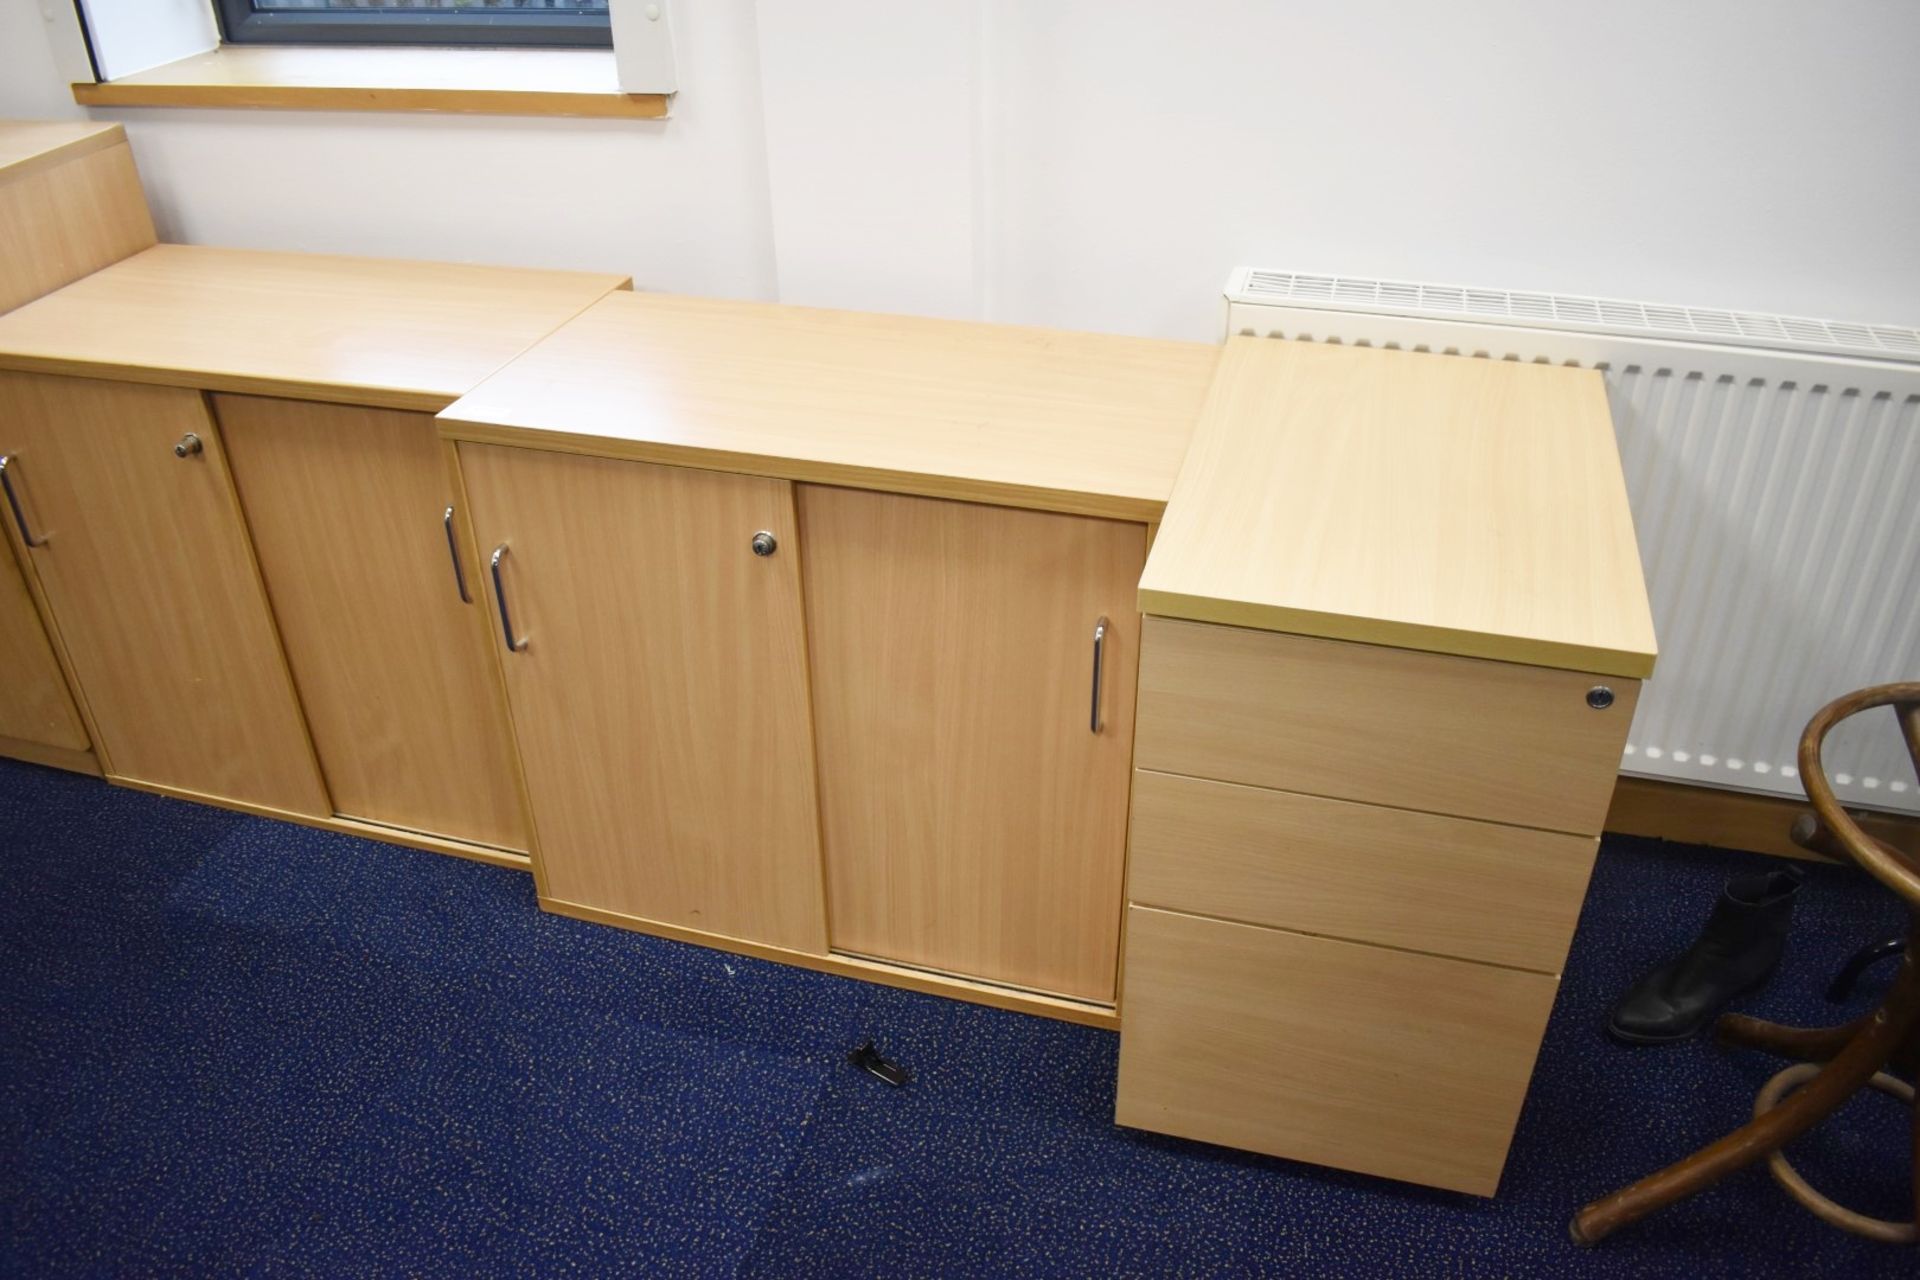 5 x Assorted Office Cabinets - Ref: FF177 D - CL544 - Location: Leeds, LS14Collections:This item - Image 3 of 4